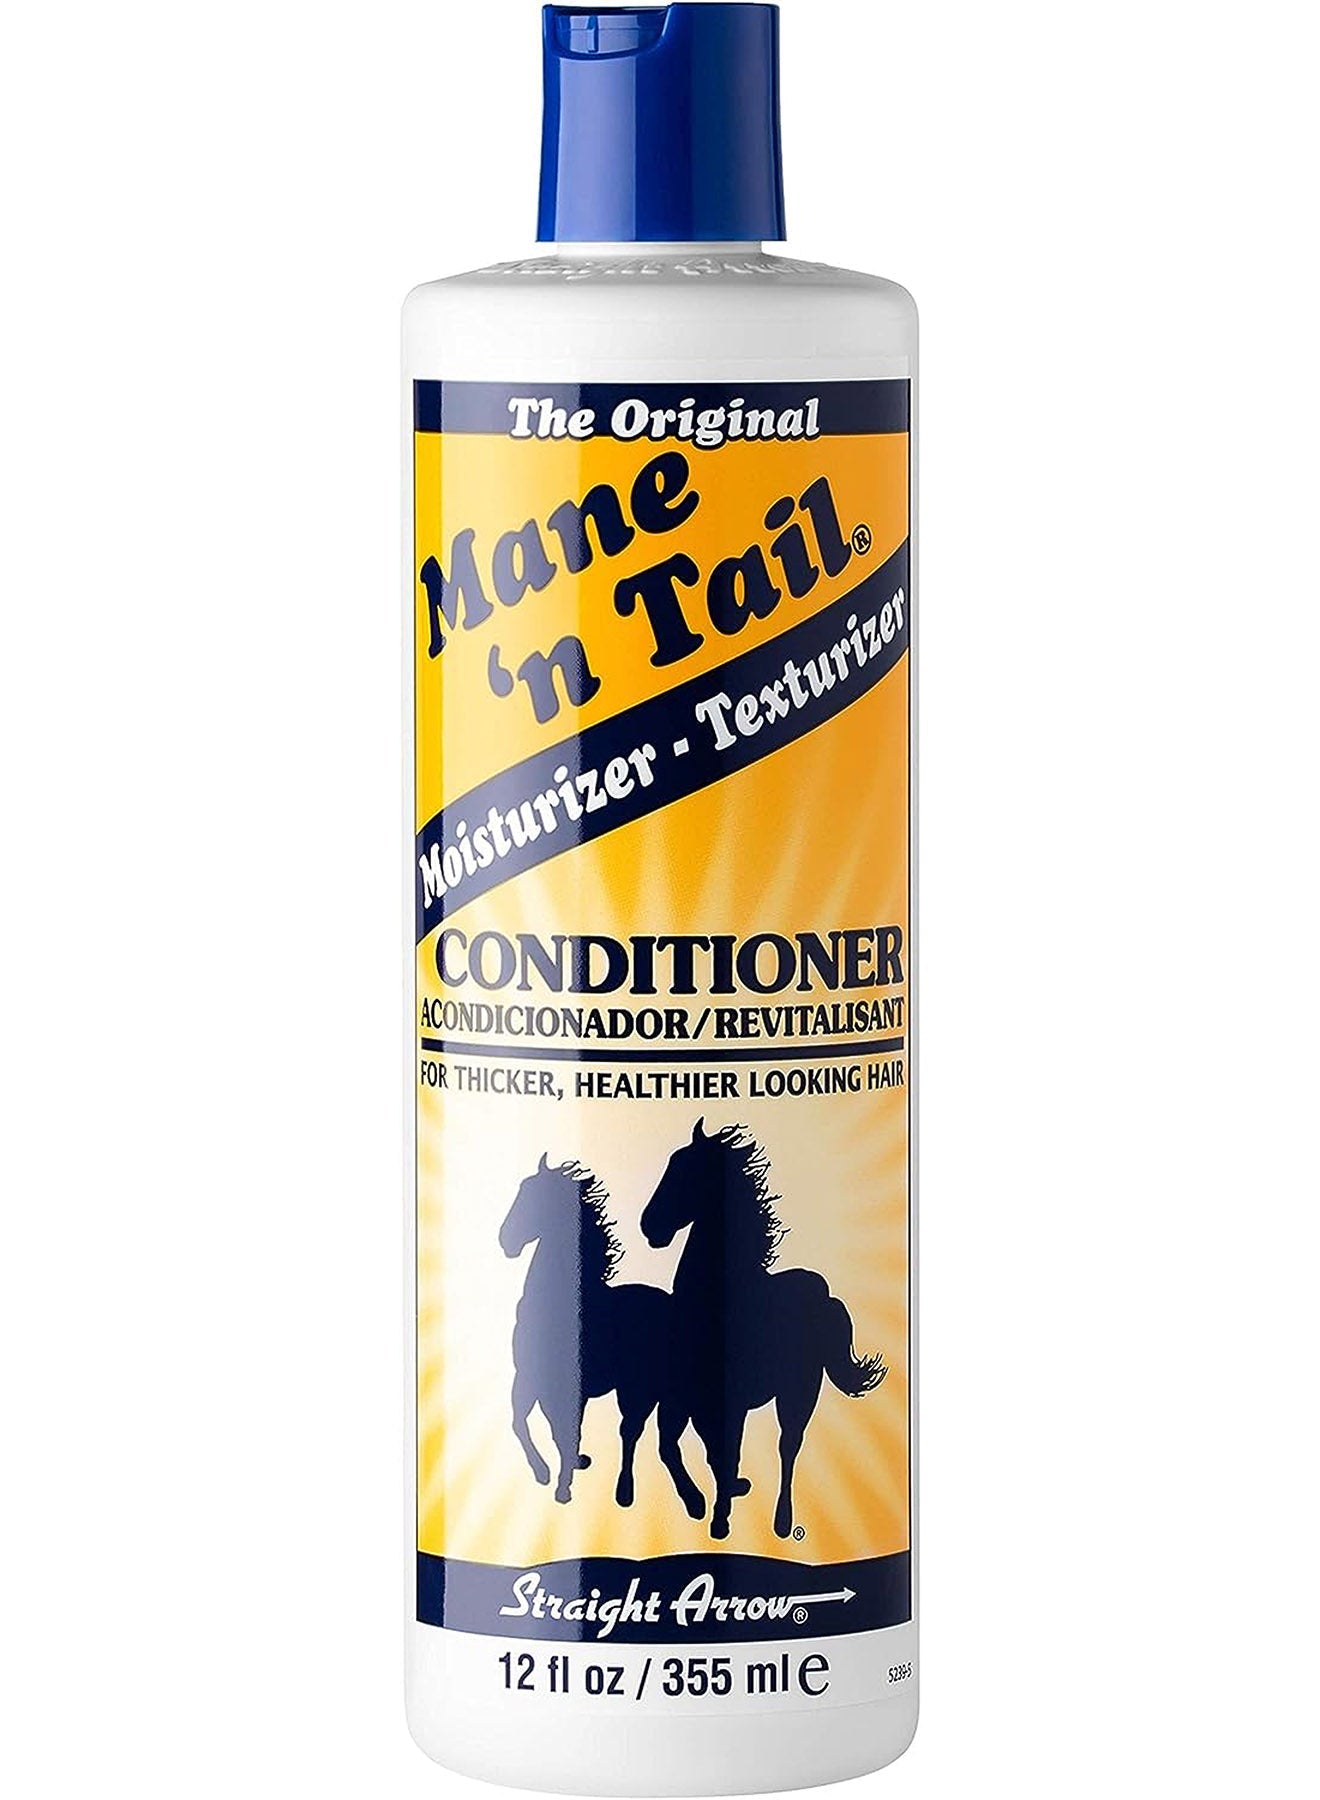 Mane n Tail Conditioner 355ml Value Pack of 3 